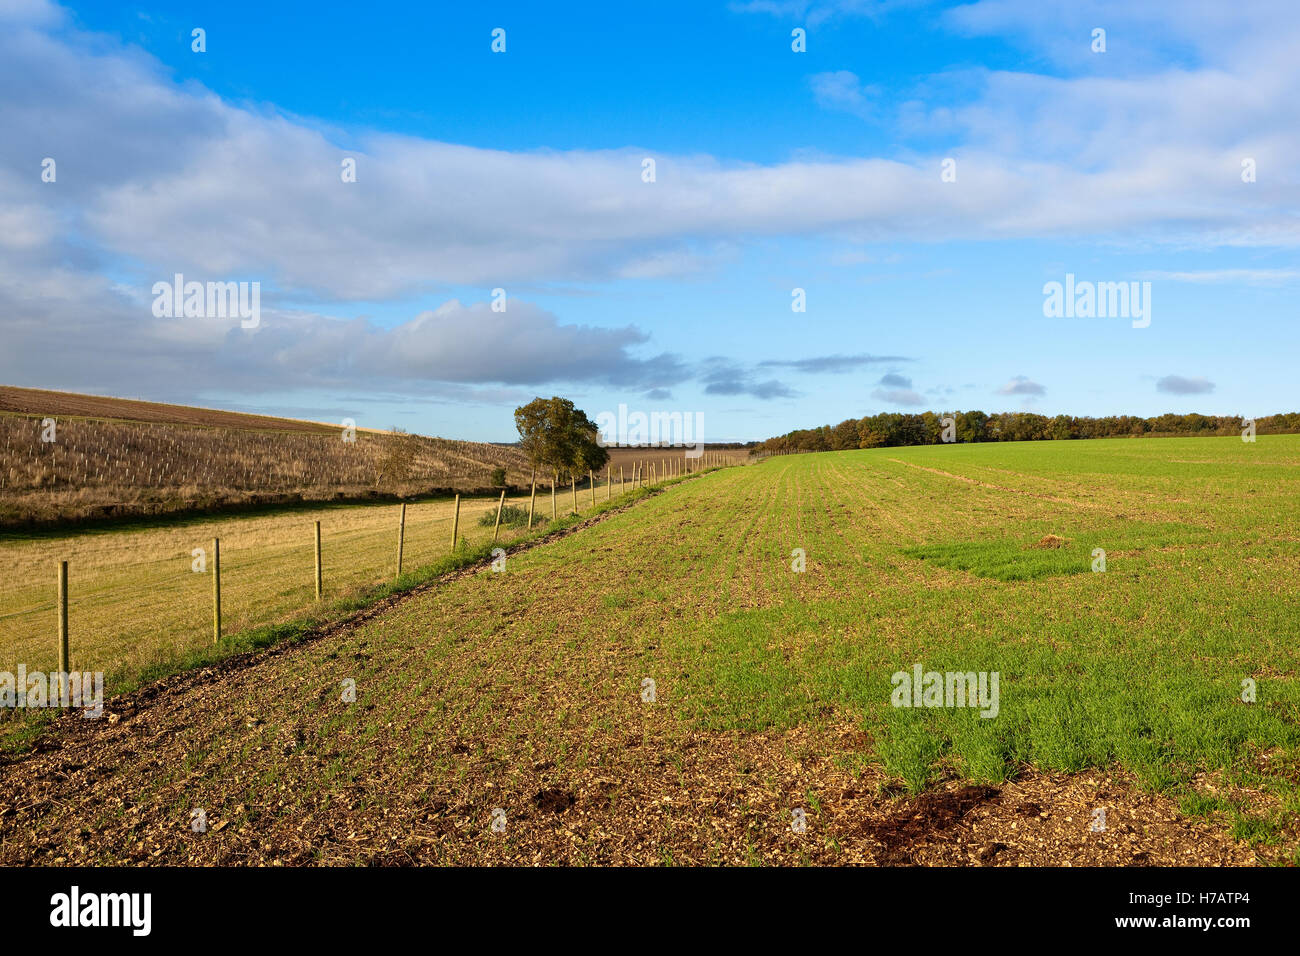 Autumn landscape with a fenced meadow between sapling trees and a field of seedling cereals on the scenic Yorkshire wolds. Stock Photo